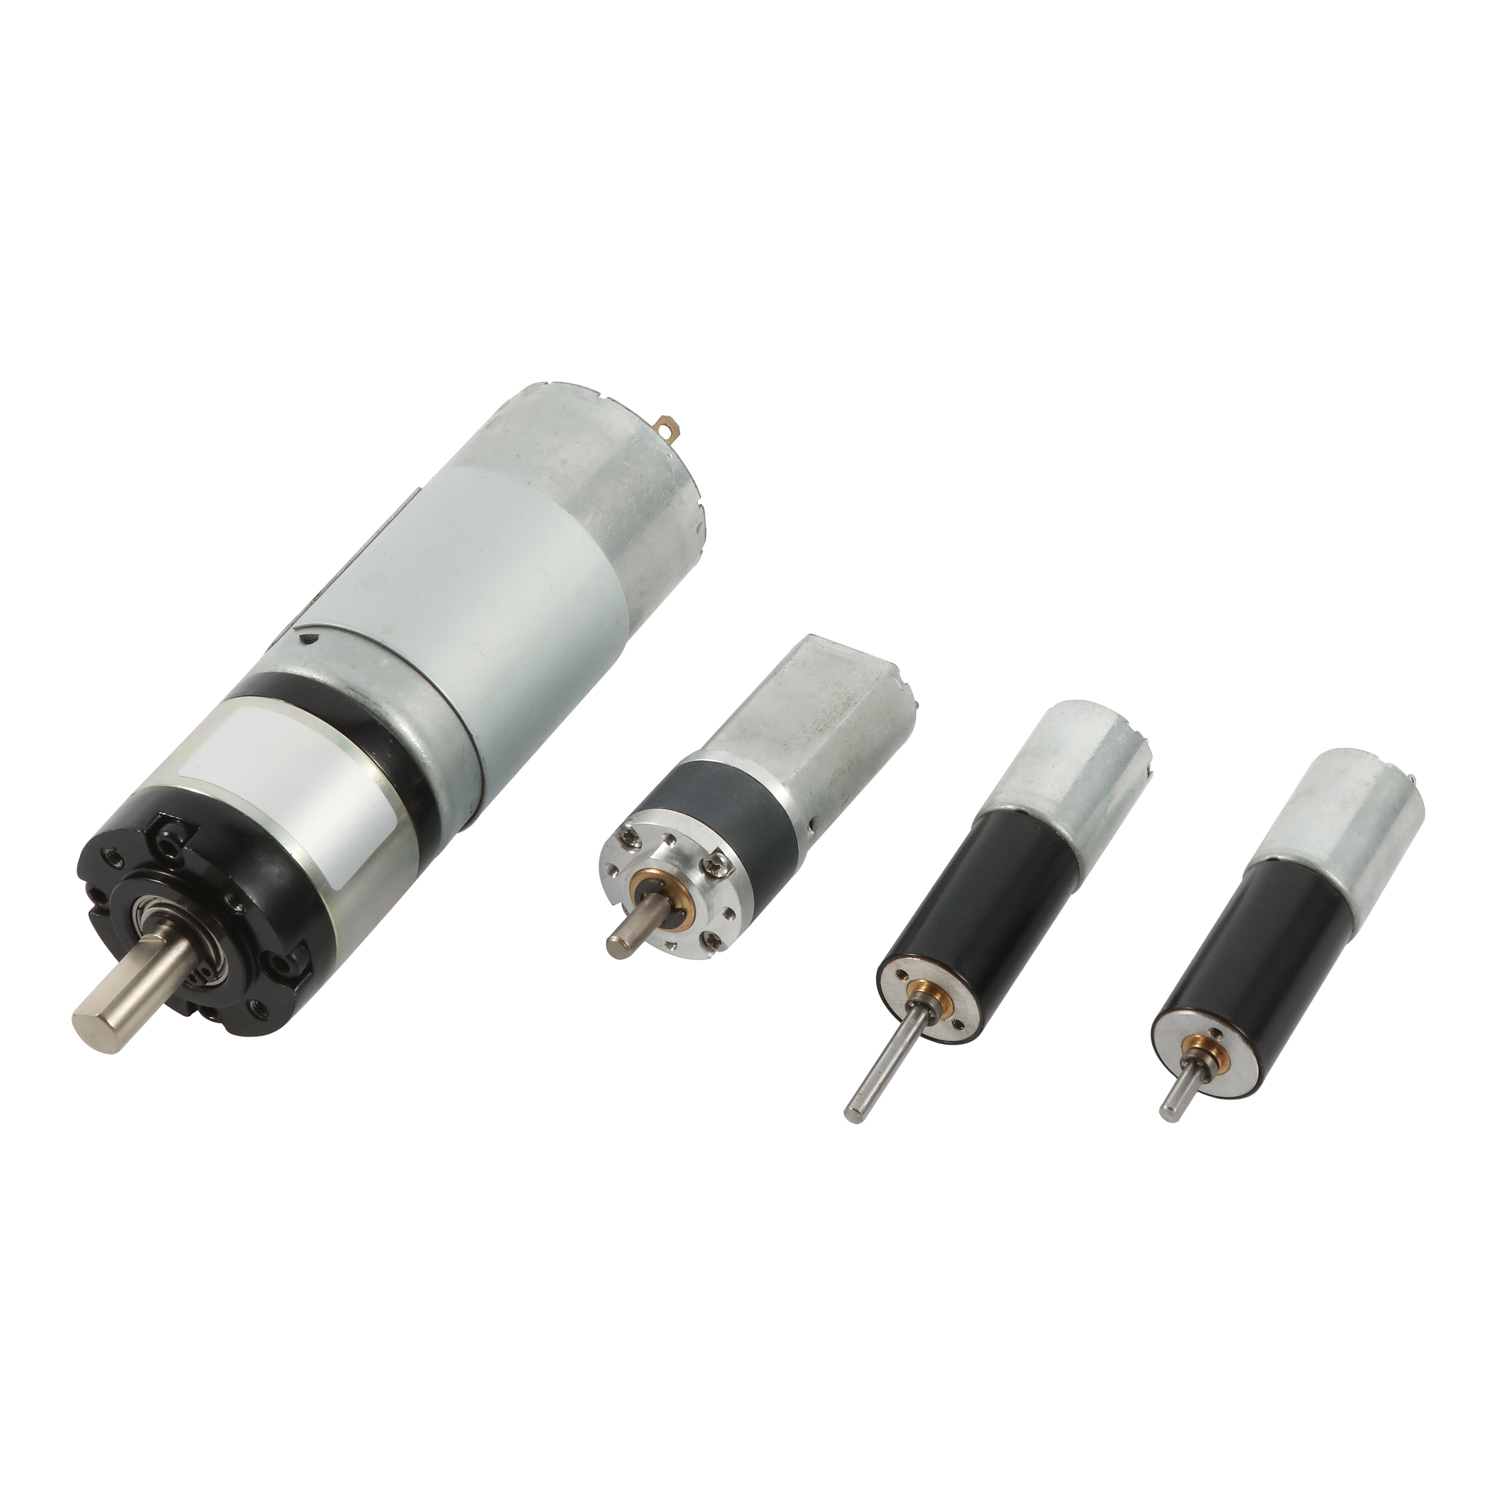 Micro 12v Planetary Motor With Gearbox